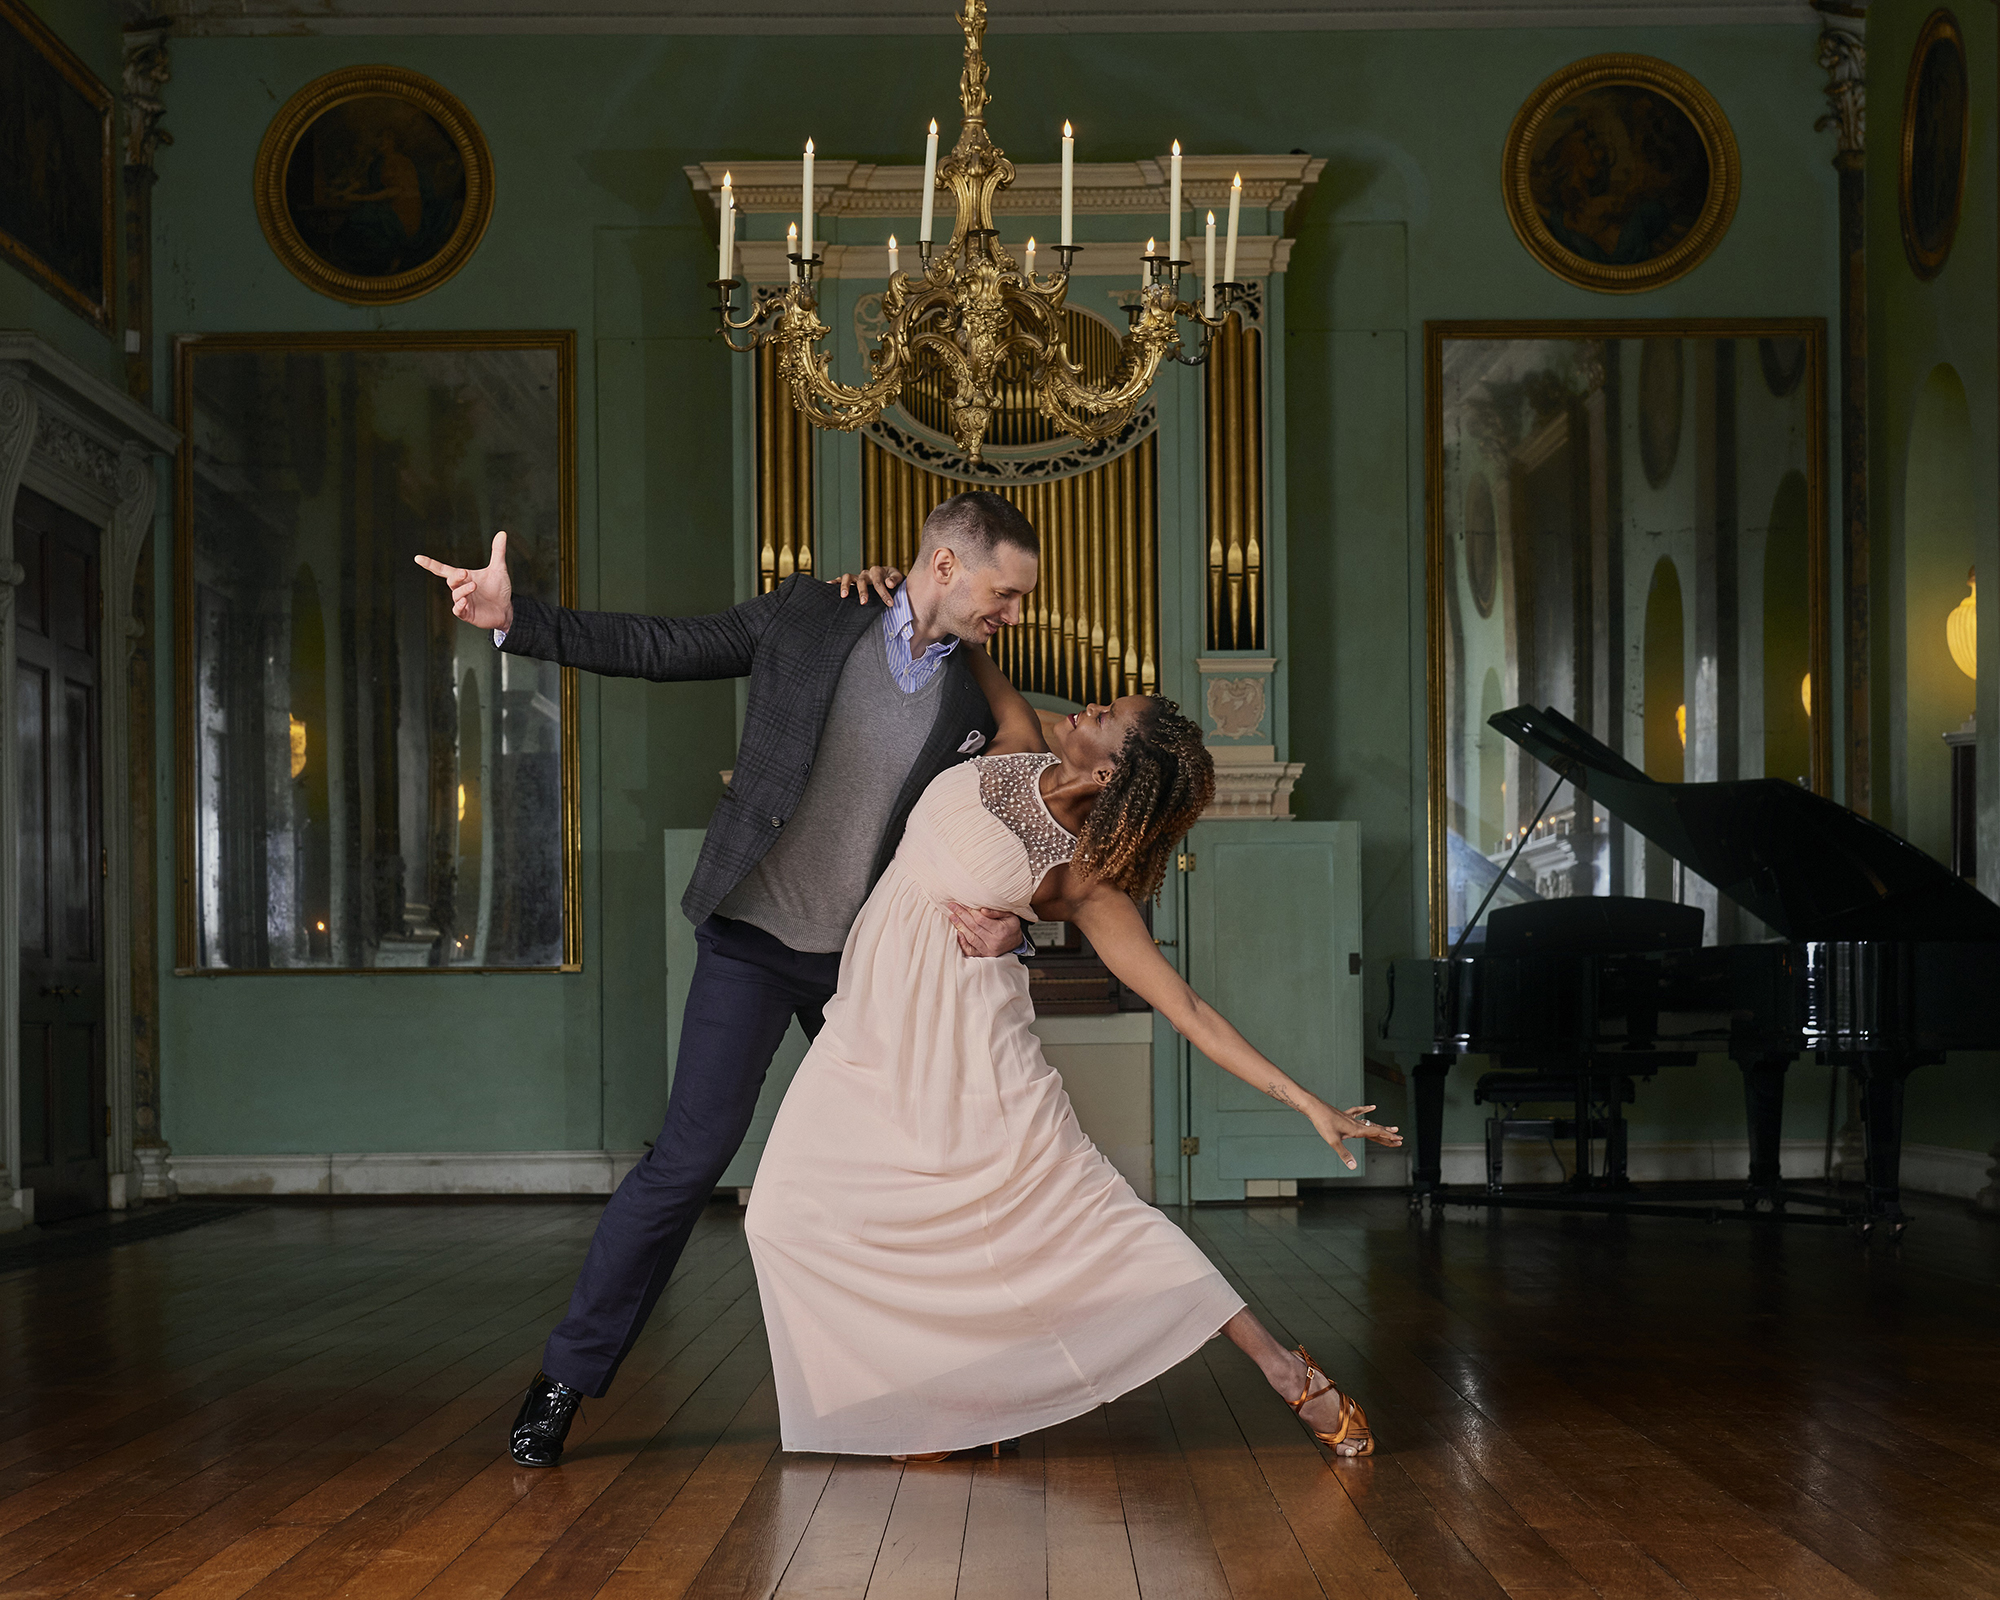 A couple dancing under a chandelier and a piano and organ in the background